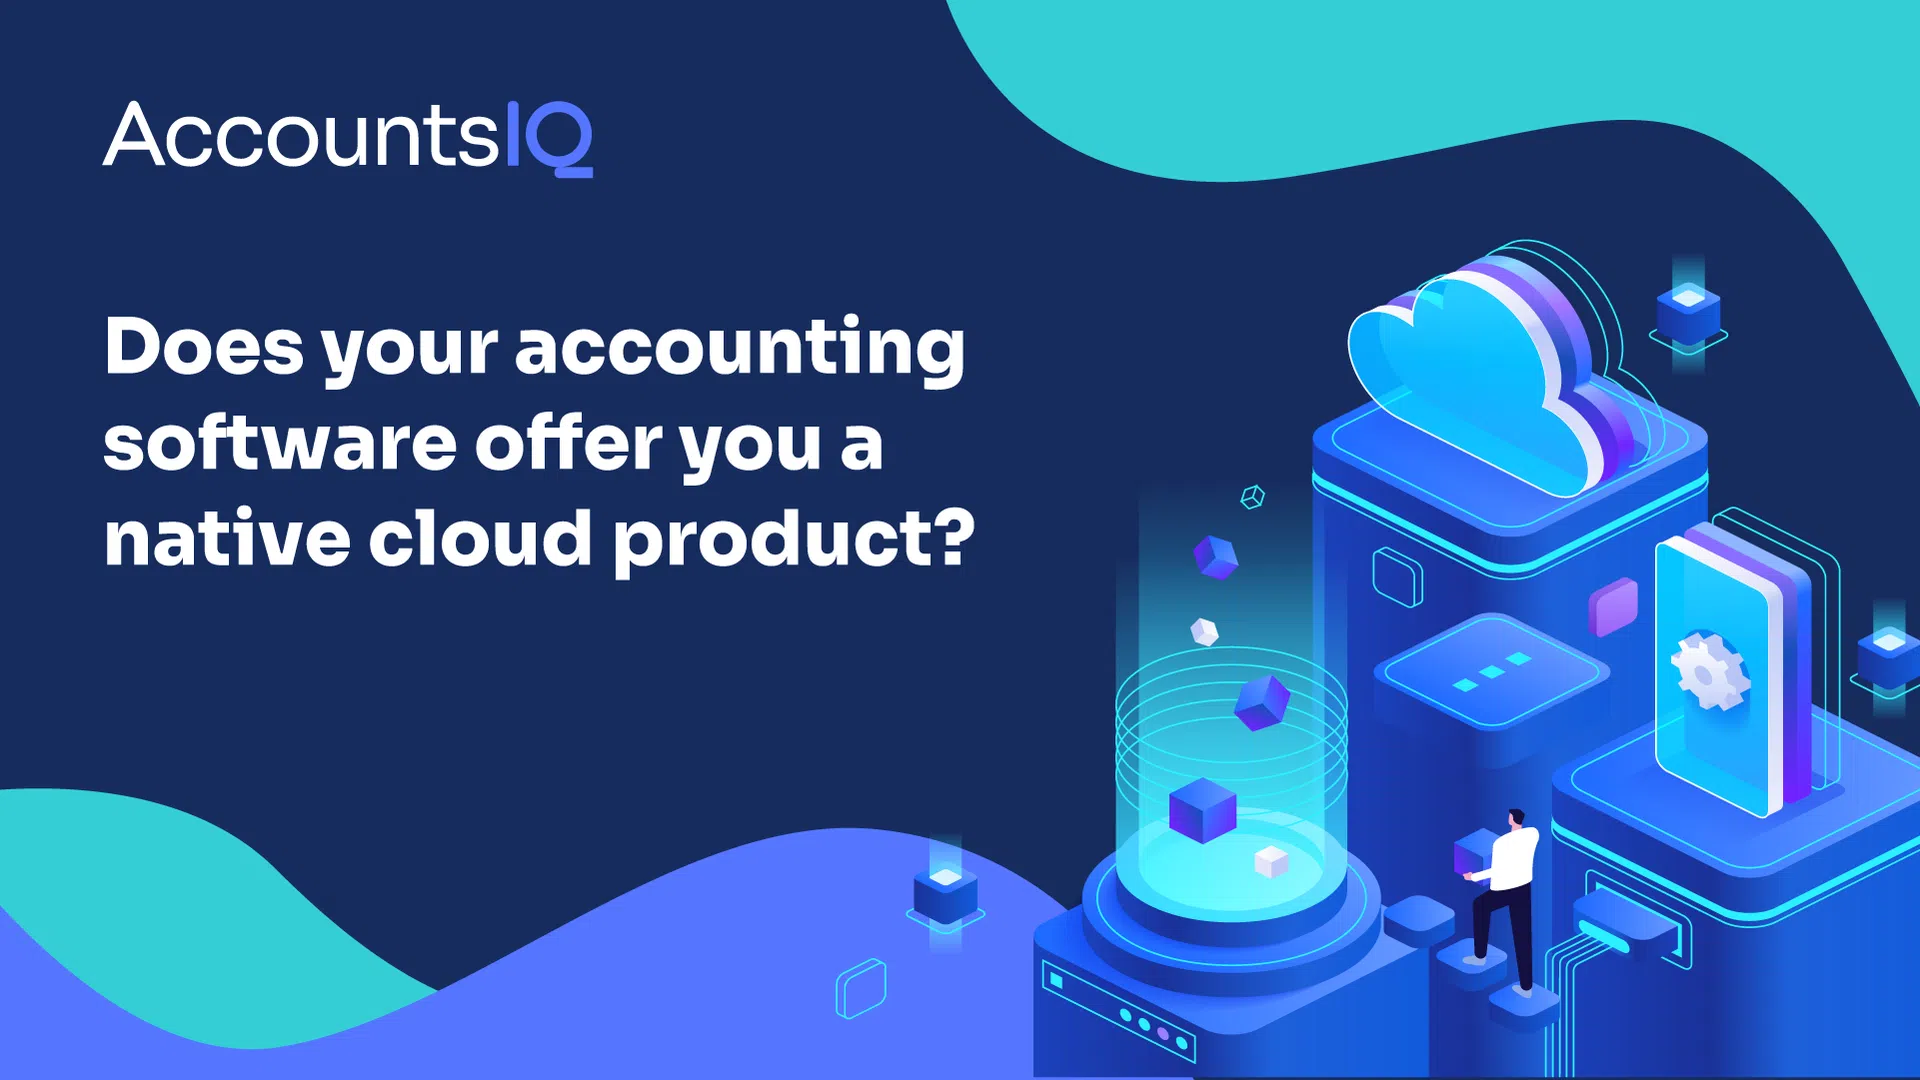 AccountsIQ: Does your accounting software offer you a native cloud product? logo